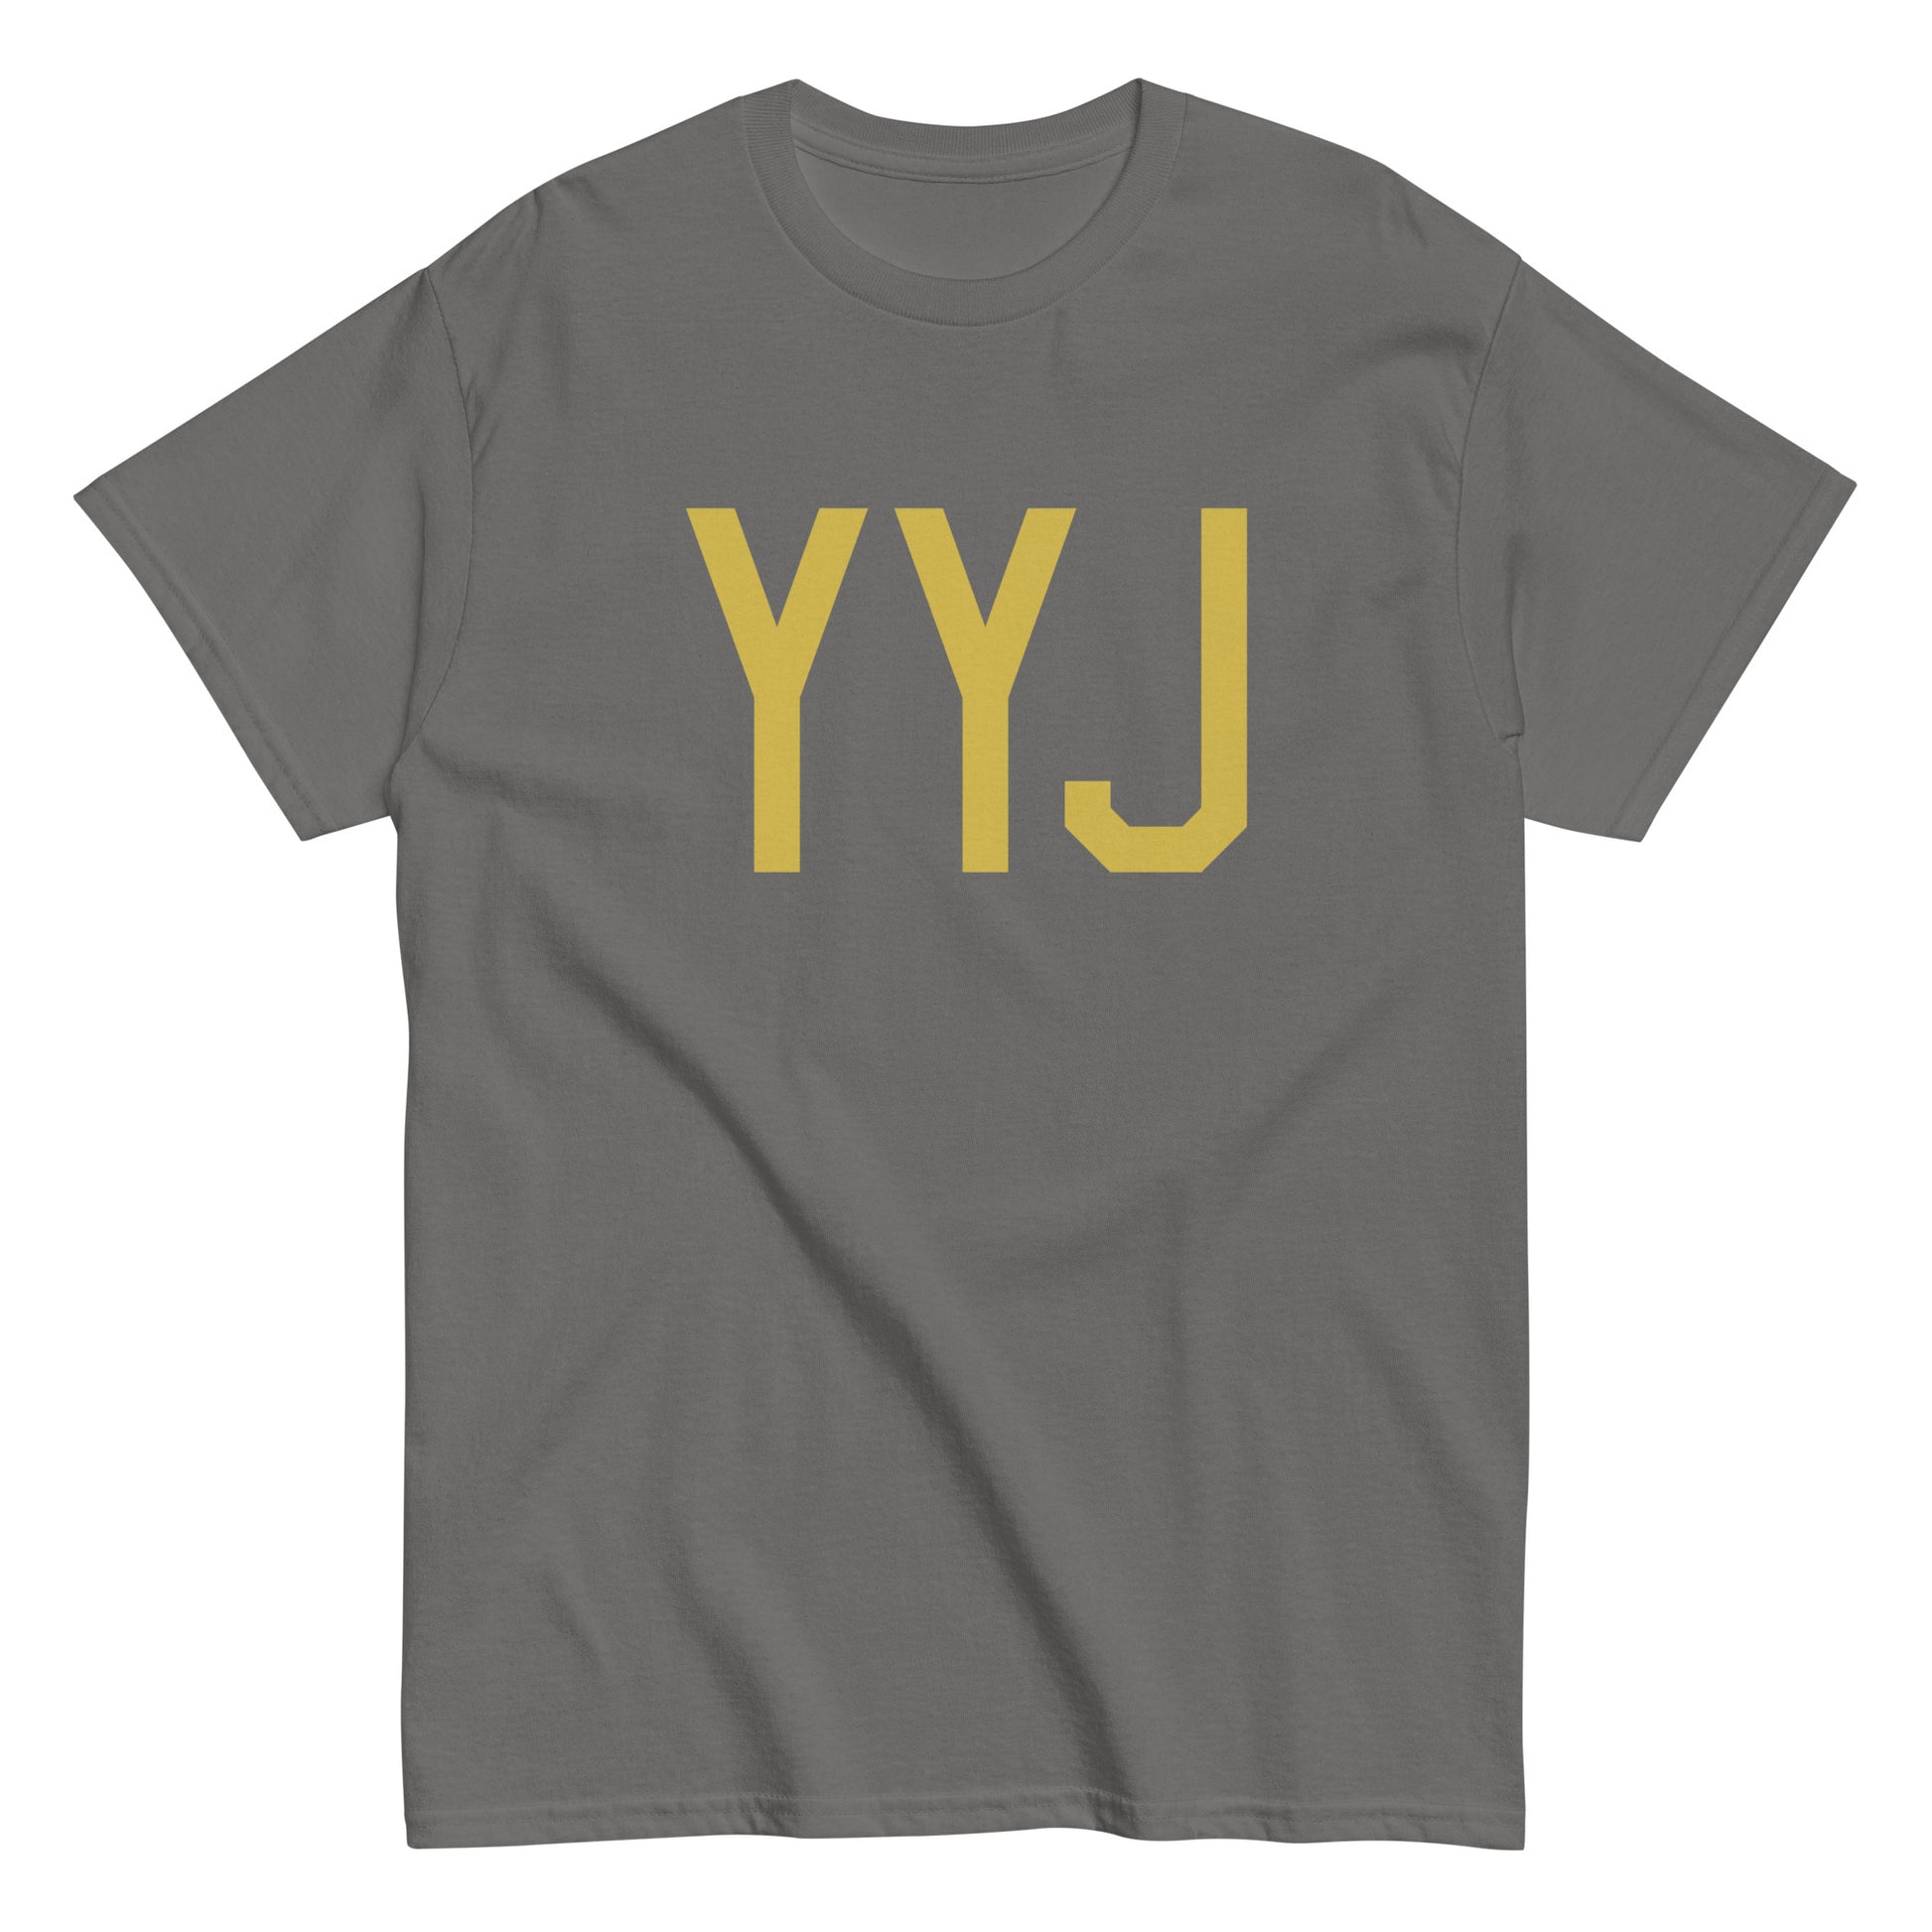 Aviation Enthusiast Men's Tee - Old Gold Graphic • YYJ Victoria • YHM Designs - Image 01